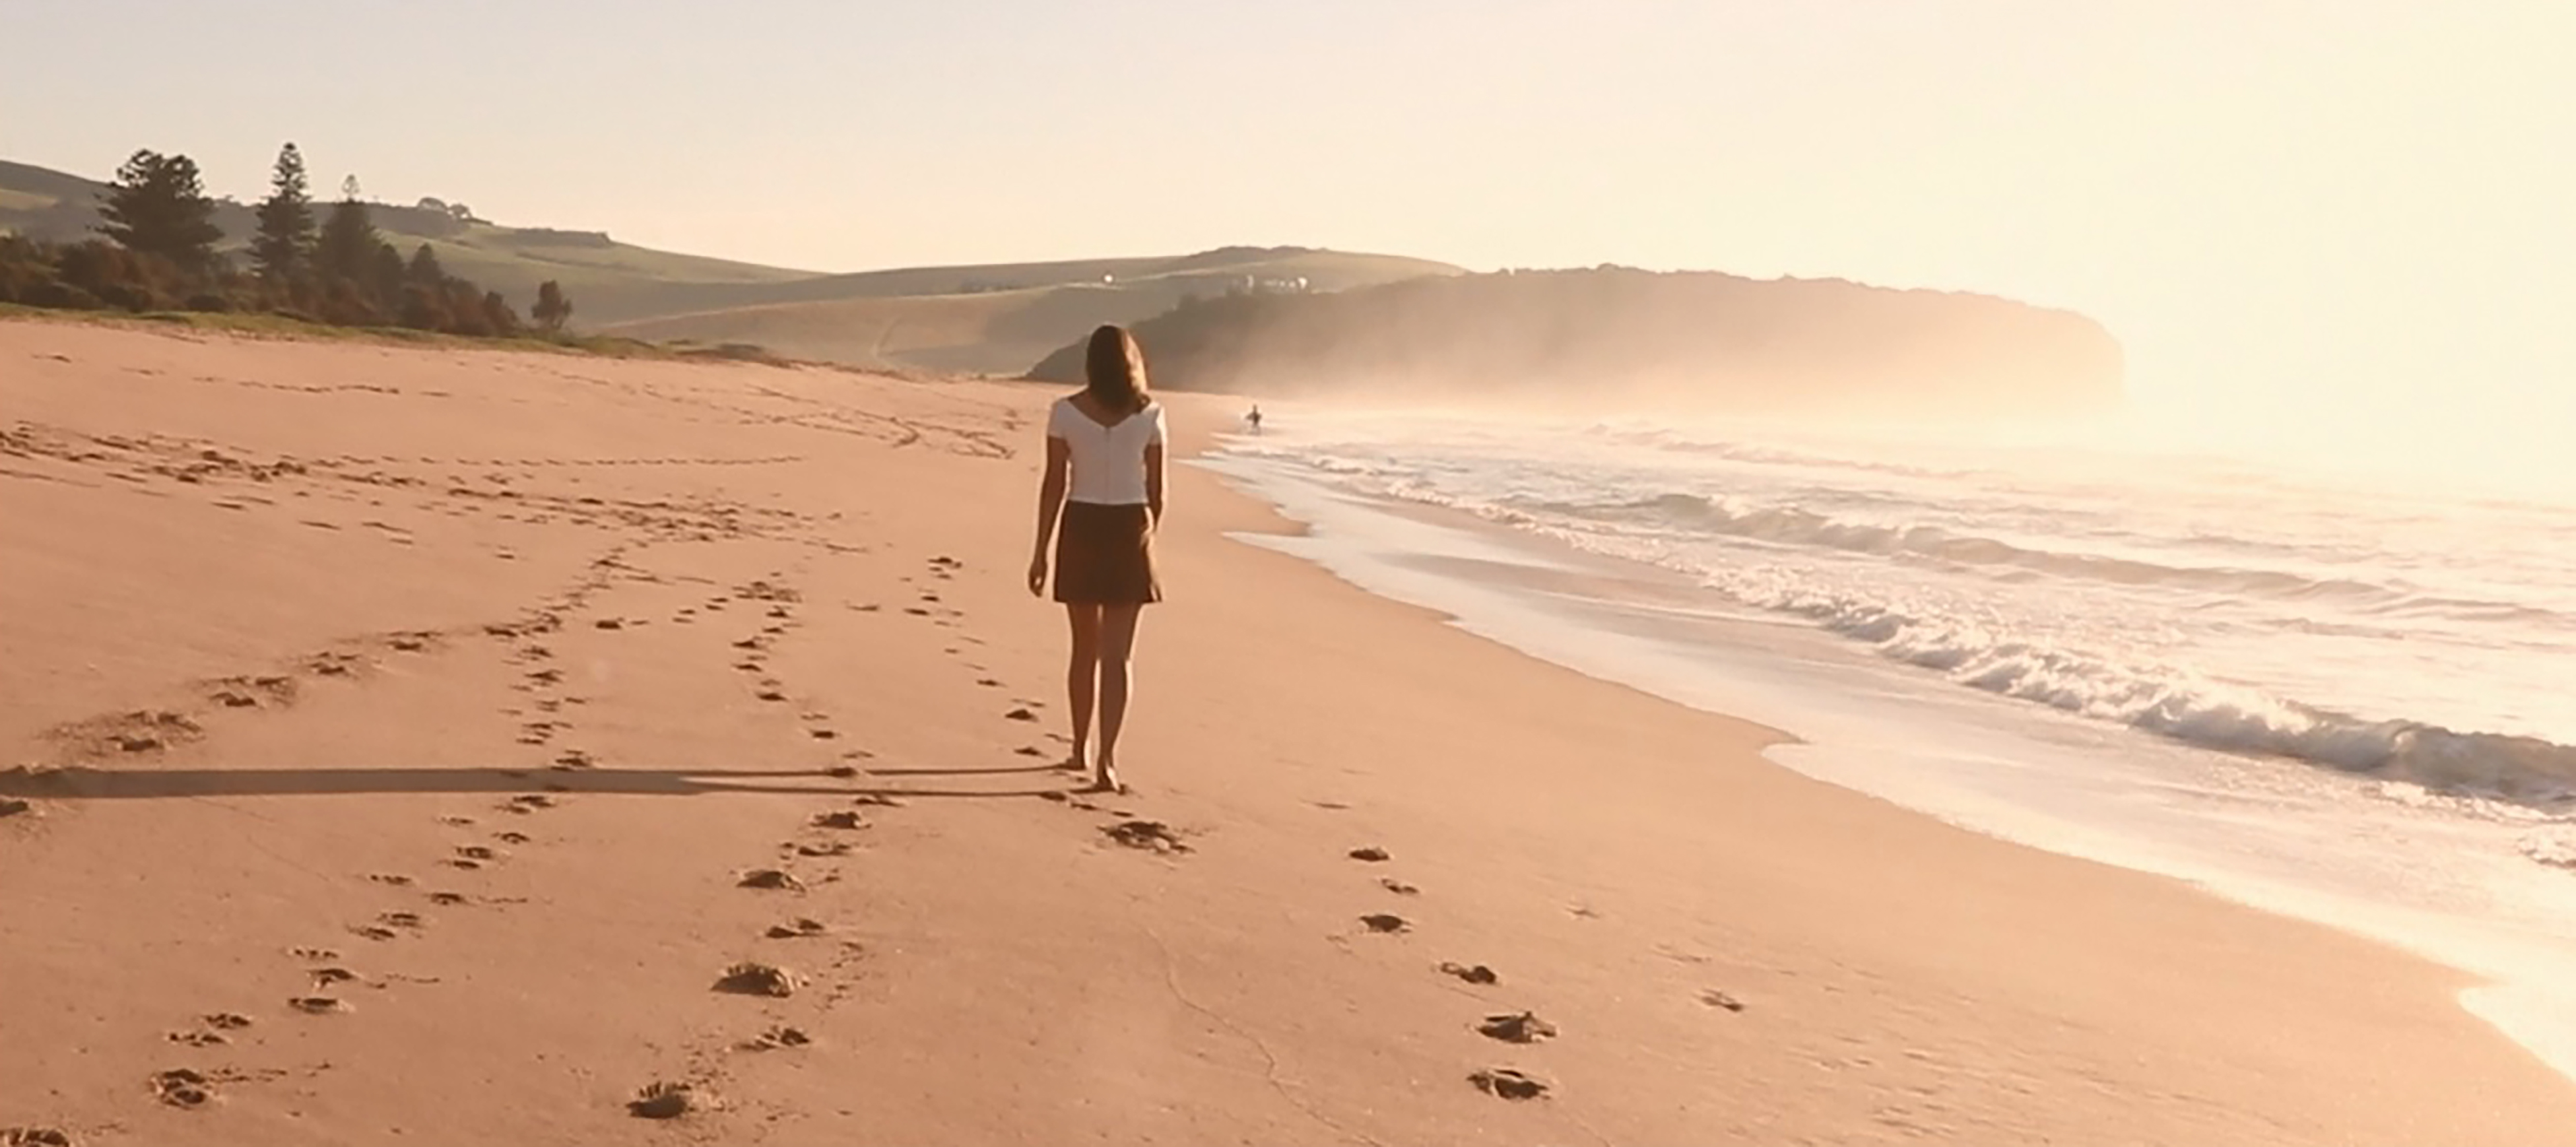 A still image of a female person walking along a beach at sunset.